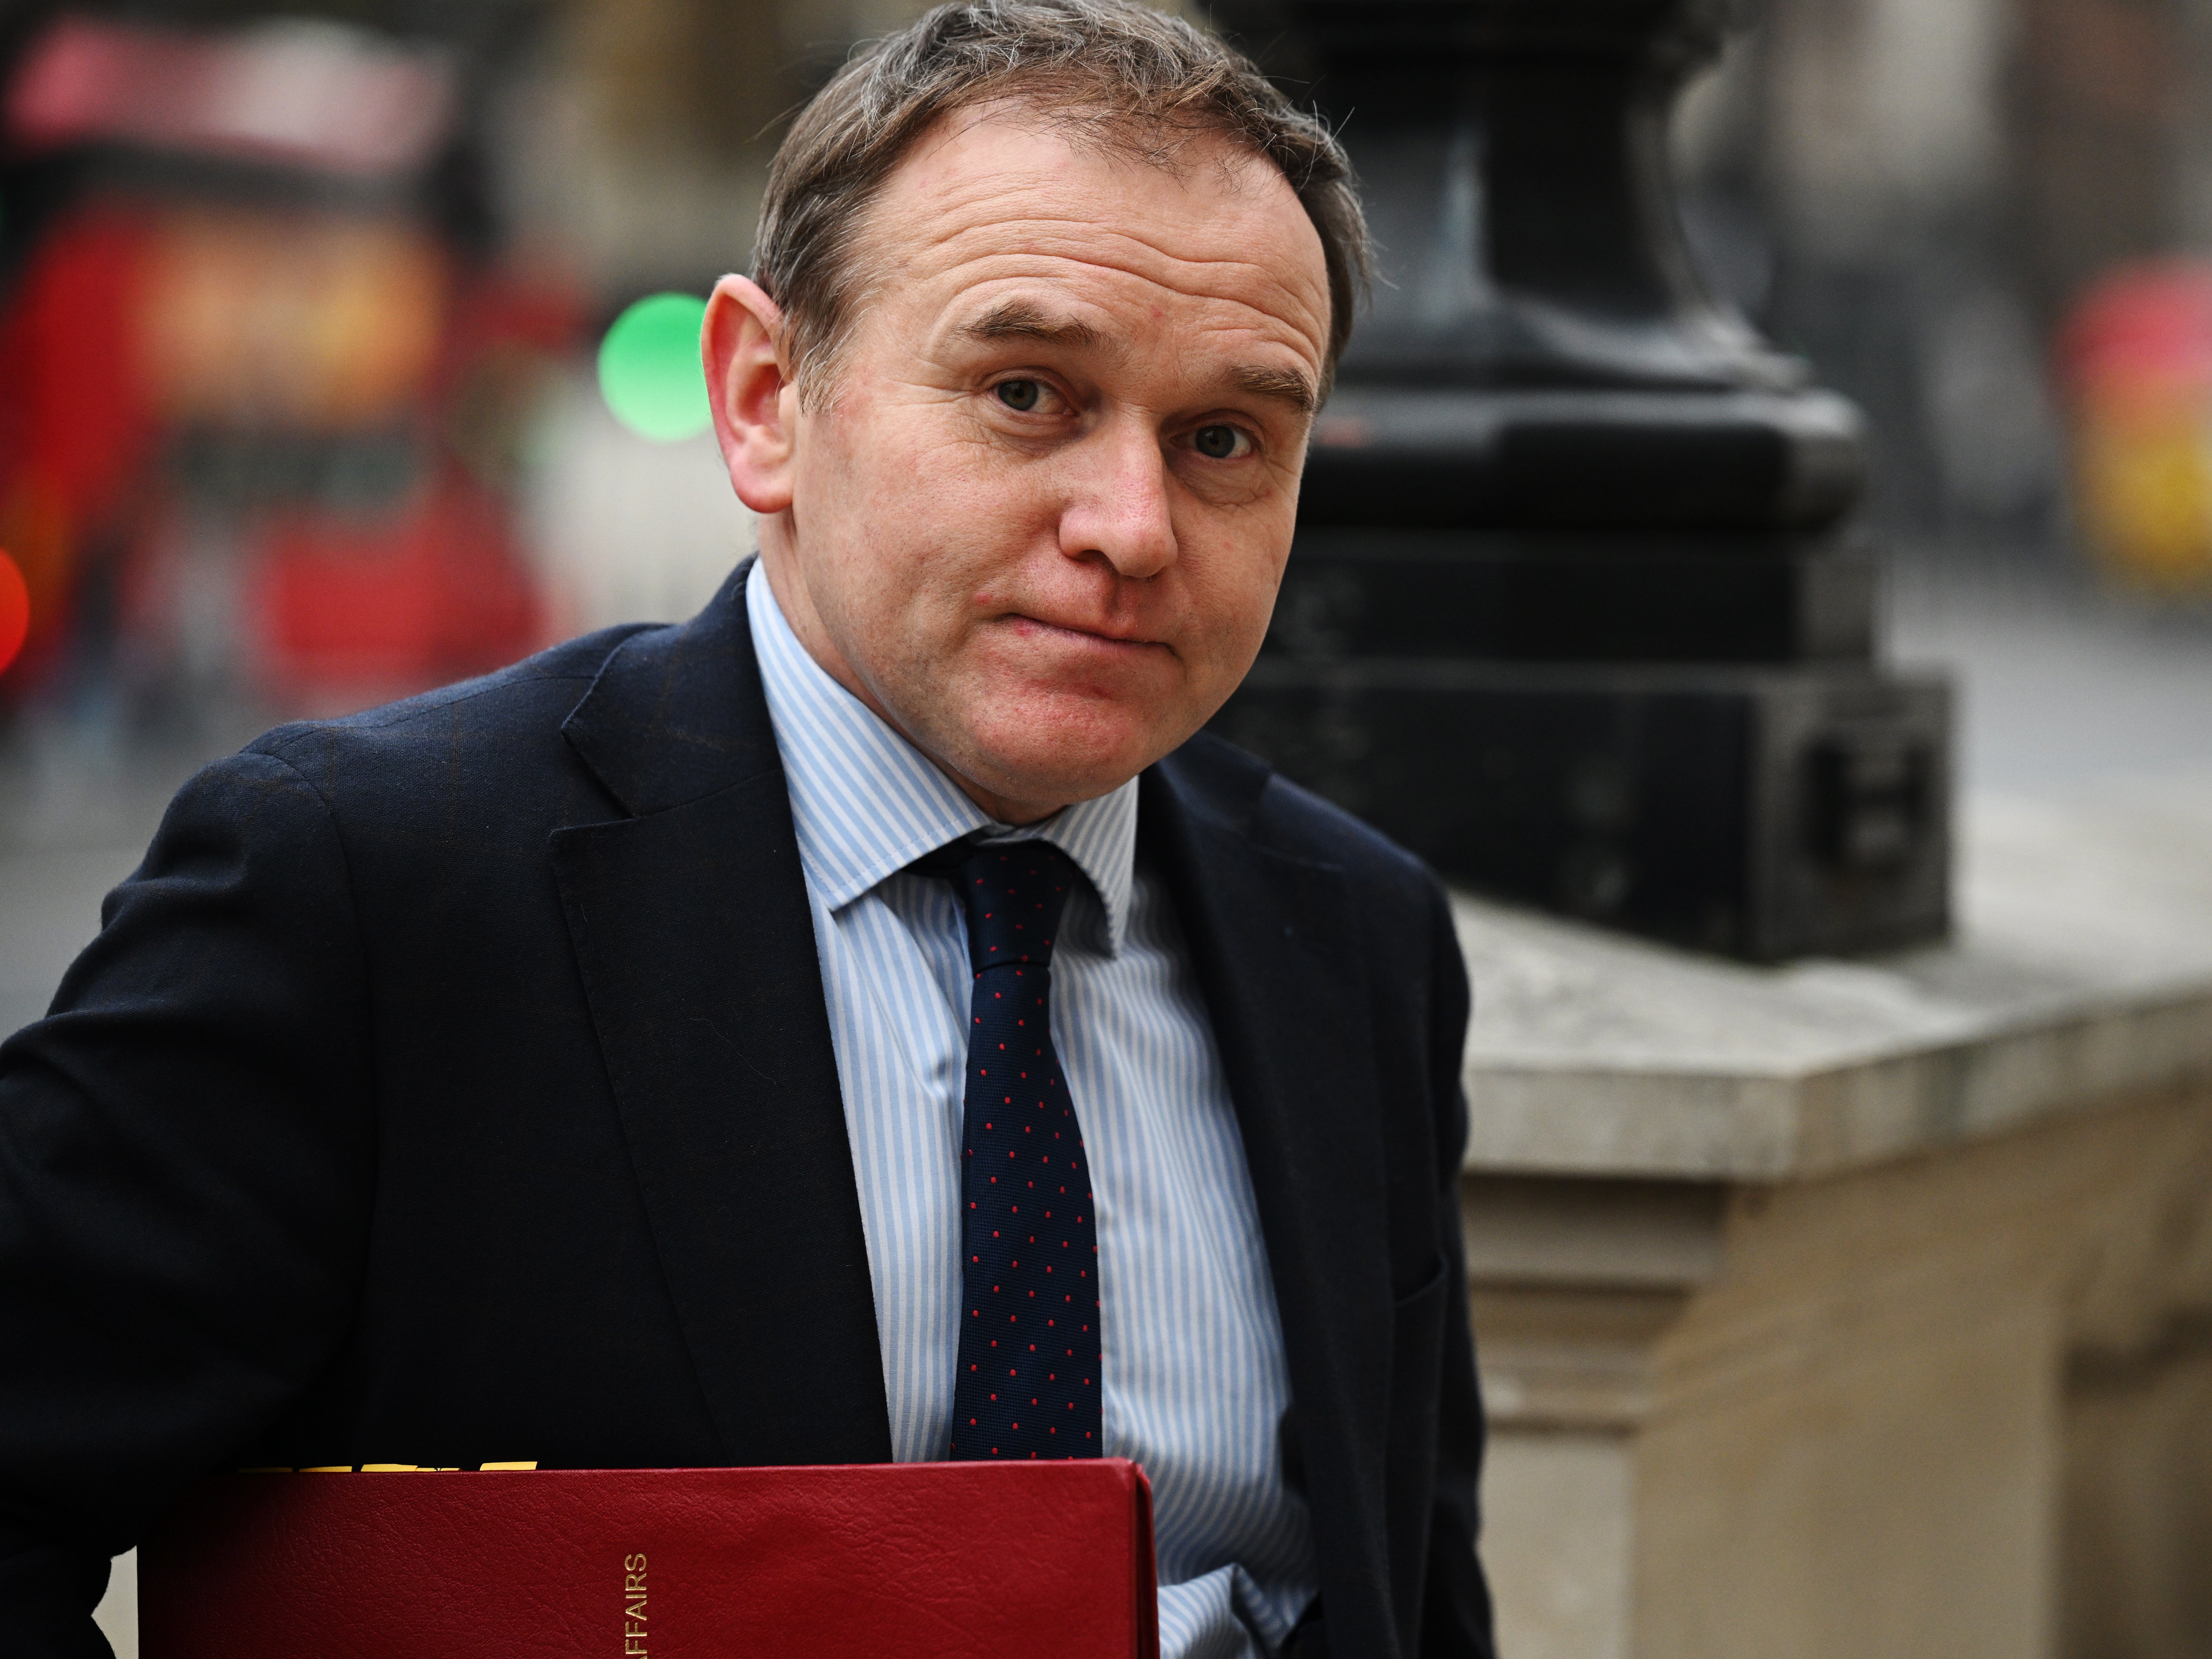 George Eustice made the comments at the National Farmers’ Union conference